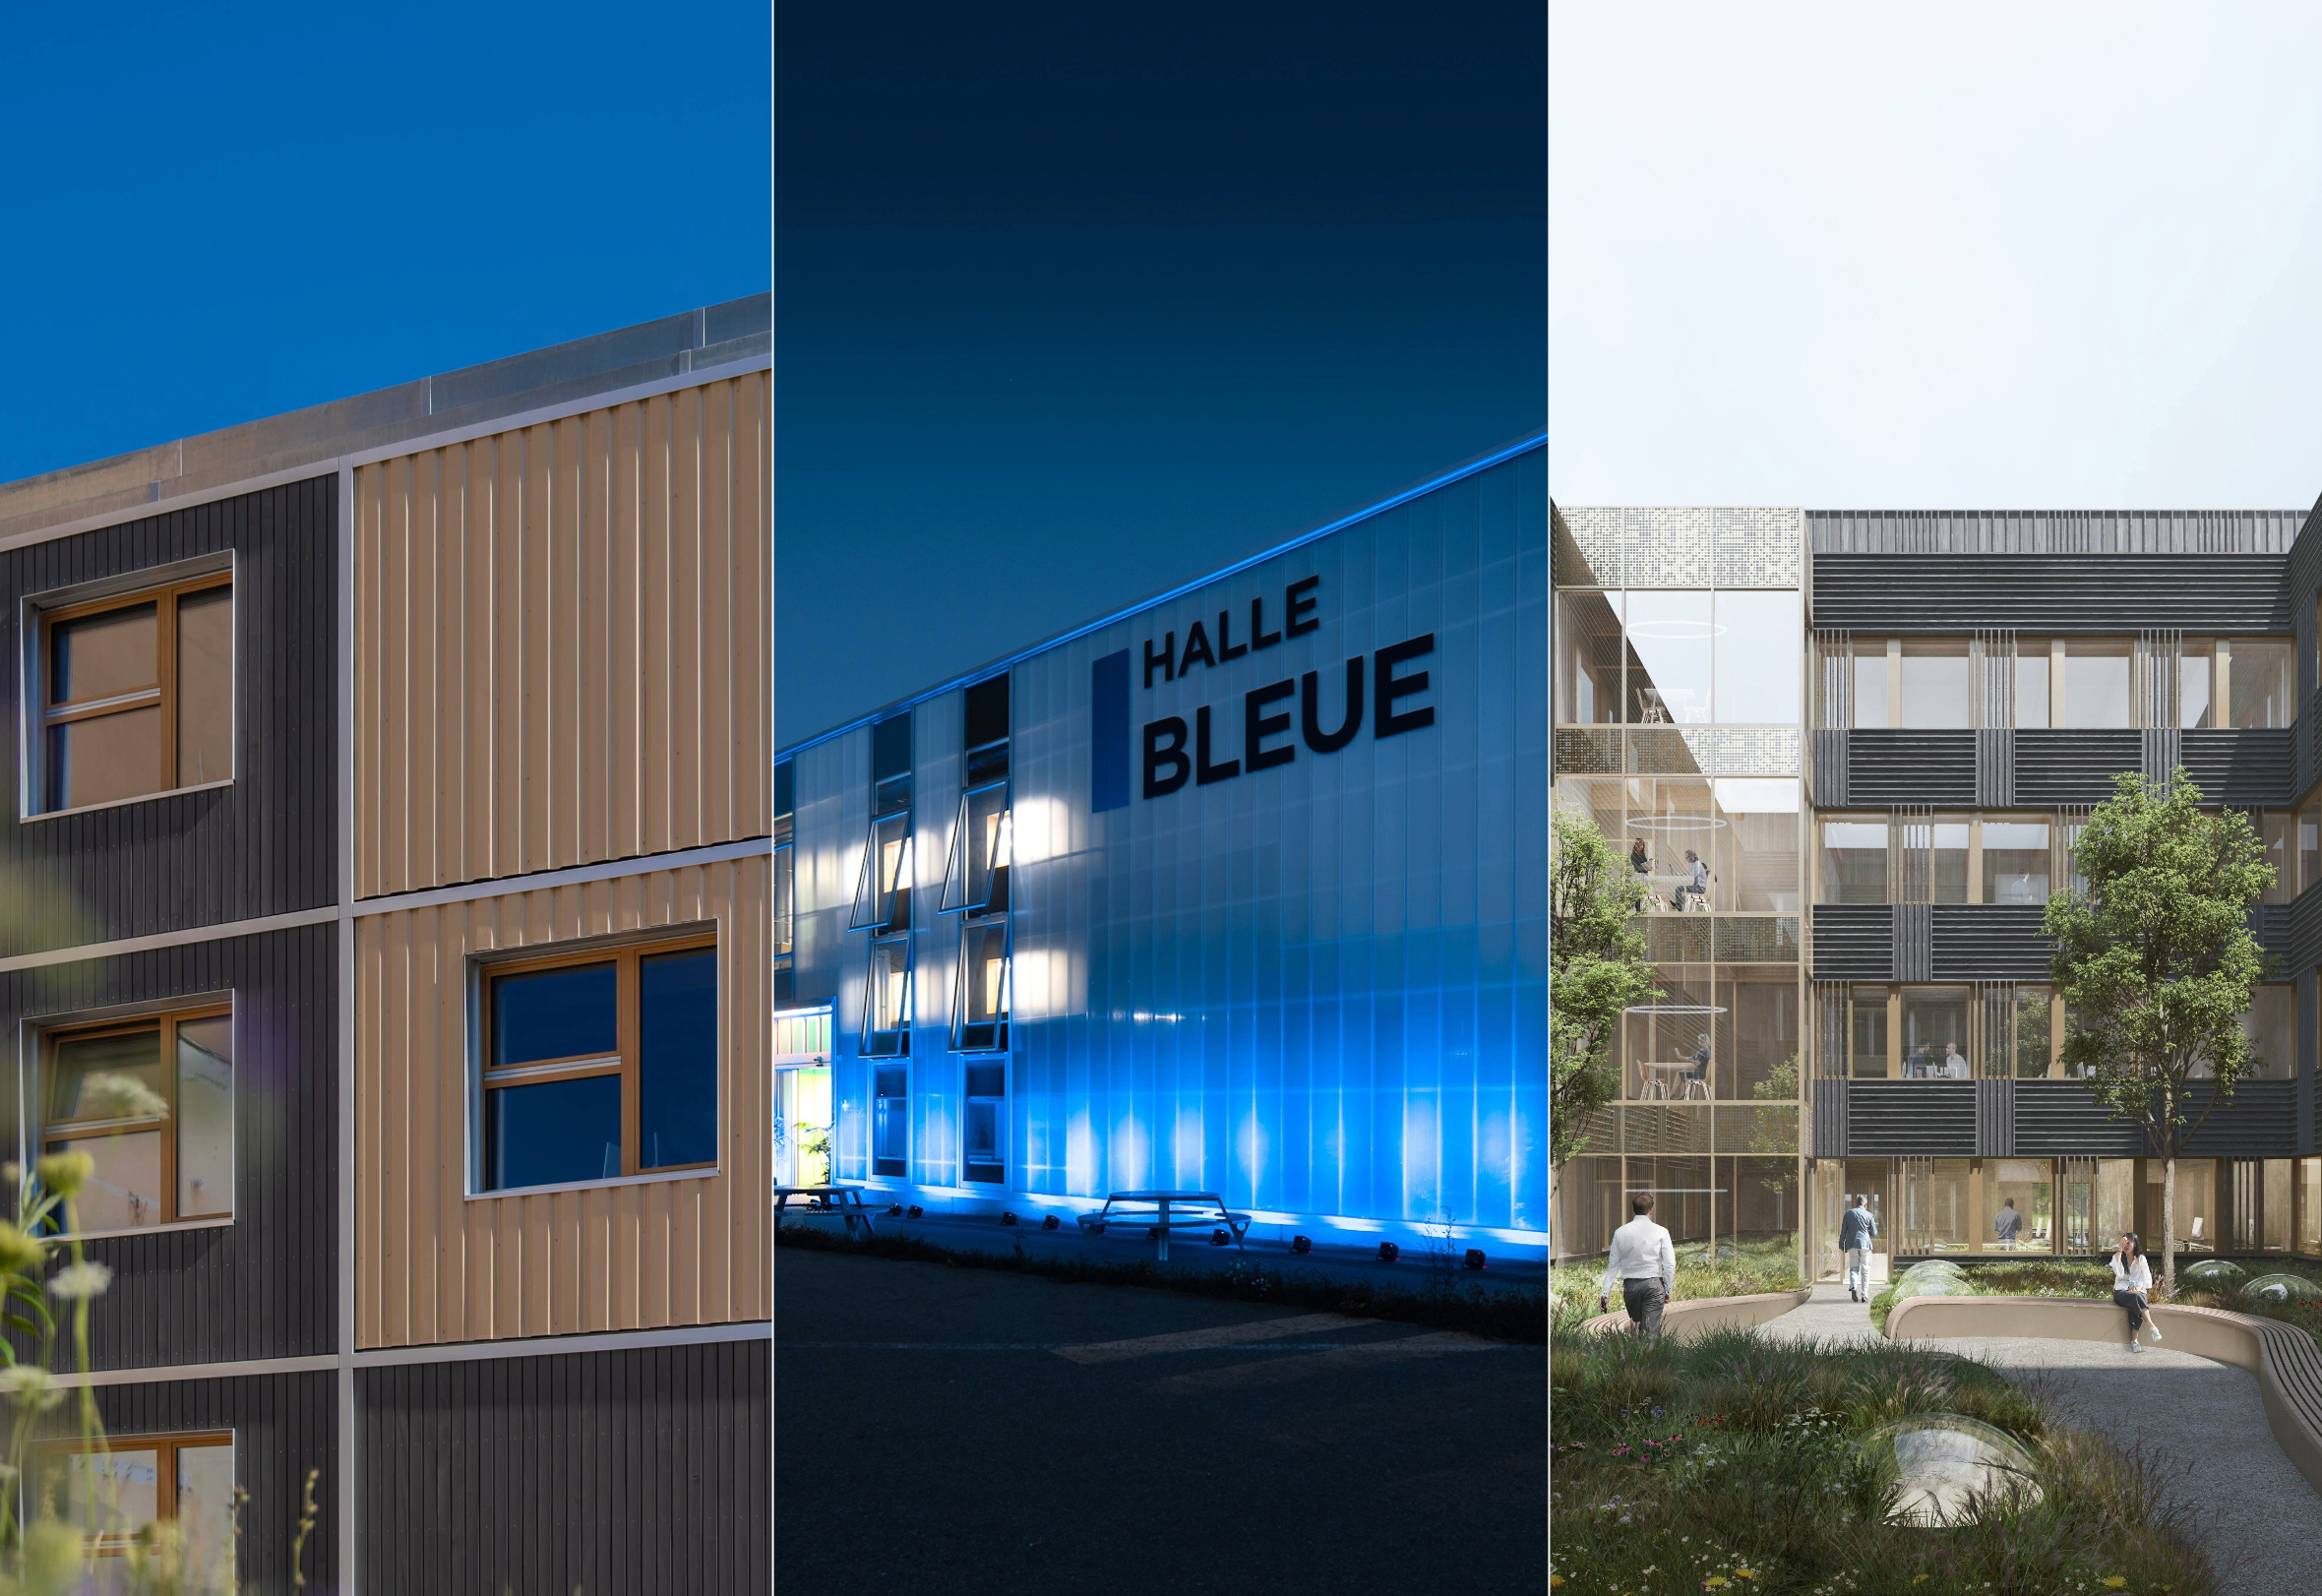 Positioned at the center of Fribourg's historic landscape, Bluefactory offers an innovative fusion of past heritage with a future-driven vision. Serving as the site's backbone, its commitment to sustainability crafts a low-carbon innovation district that speaks to global environmental needs.